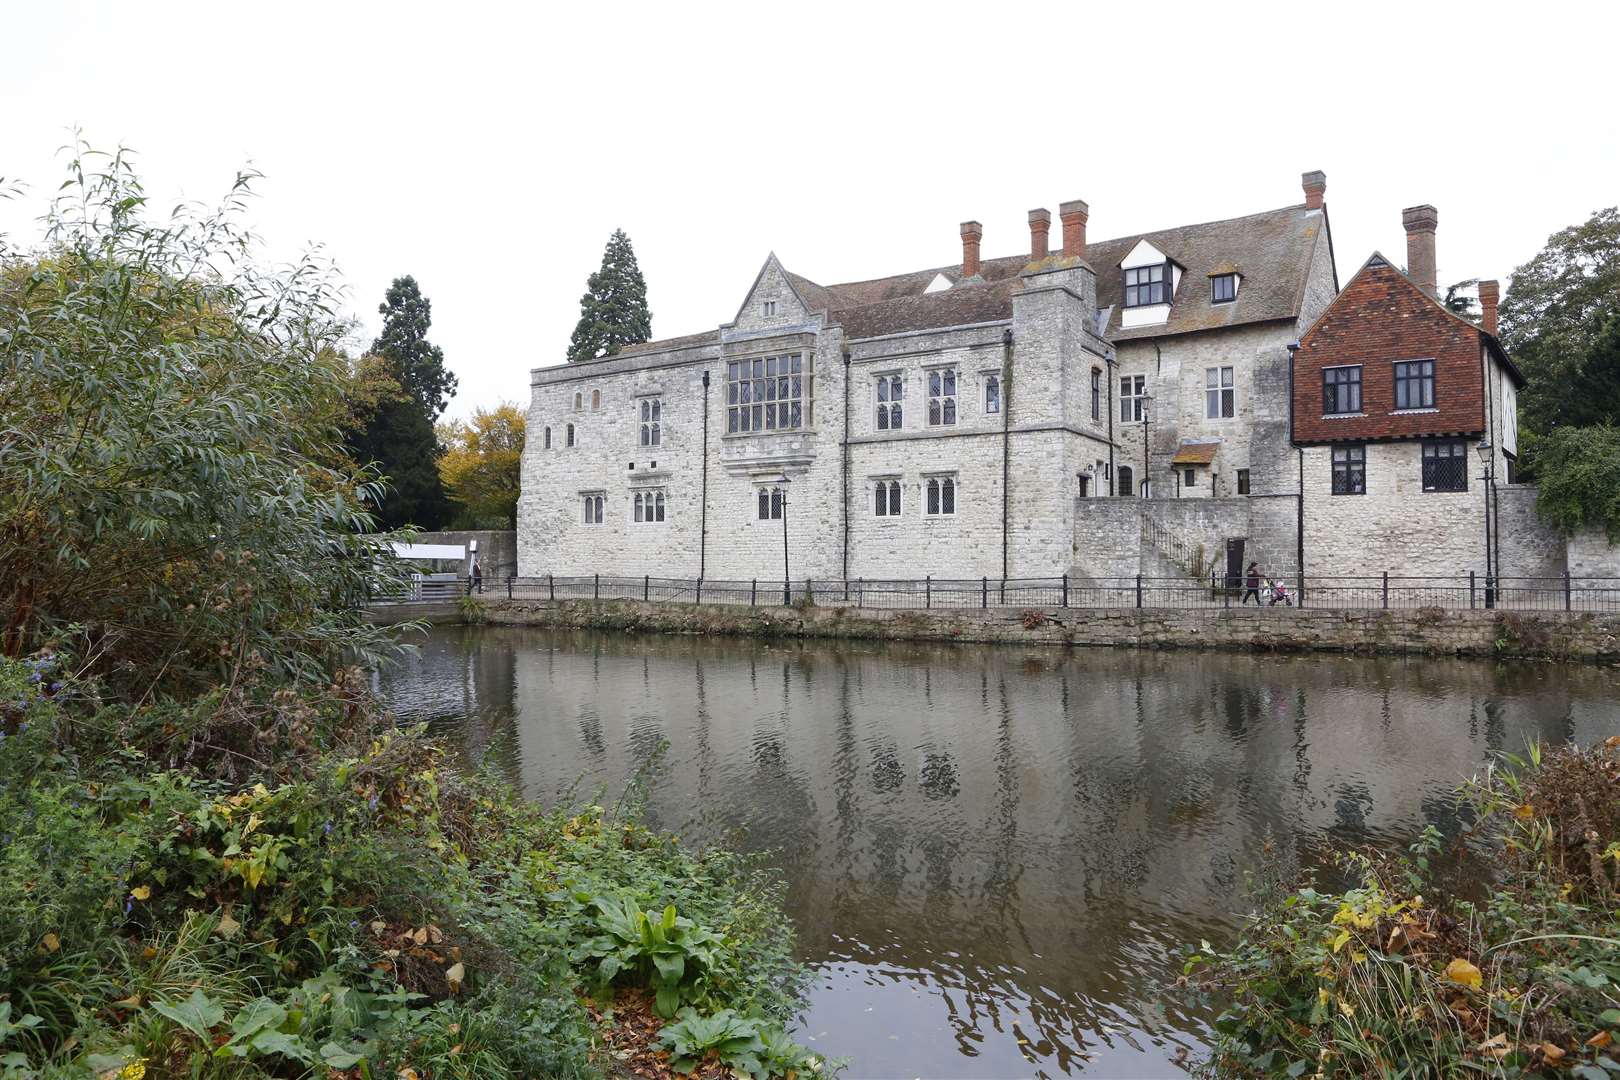 The Archbishops Palace in Maidstone where the inquest was held. Picture: Andy Jones